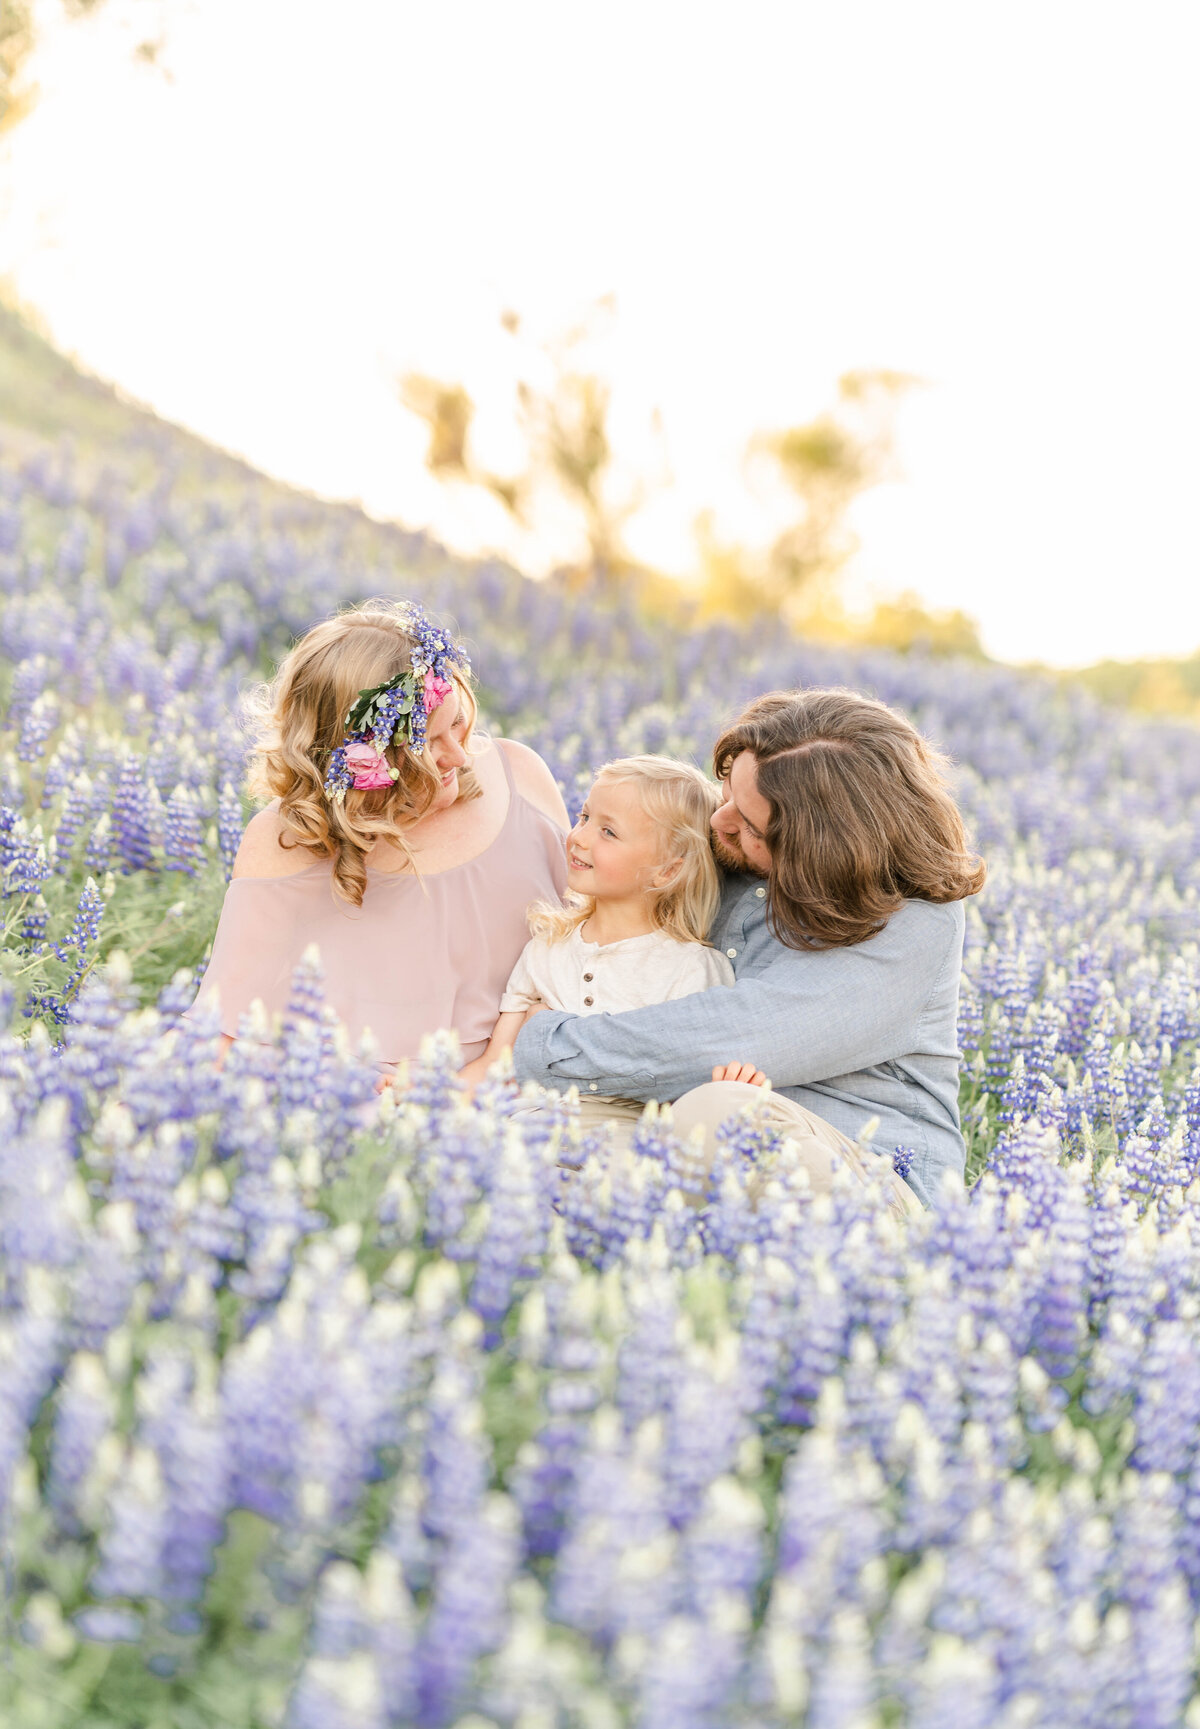 A family of three sits in a field of purple lupines hugging and smiling while the mother wears a floral headpiece, photographed by Bay Area Photographer, Light Livin Photography.